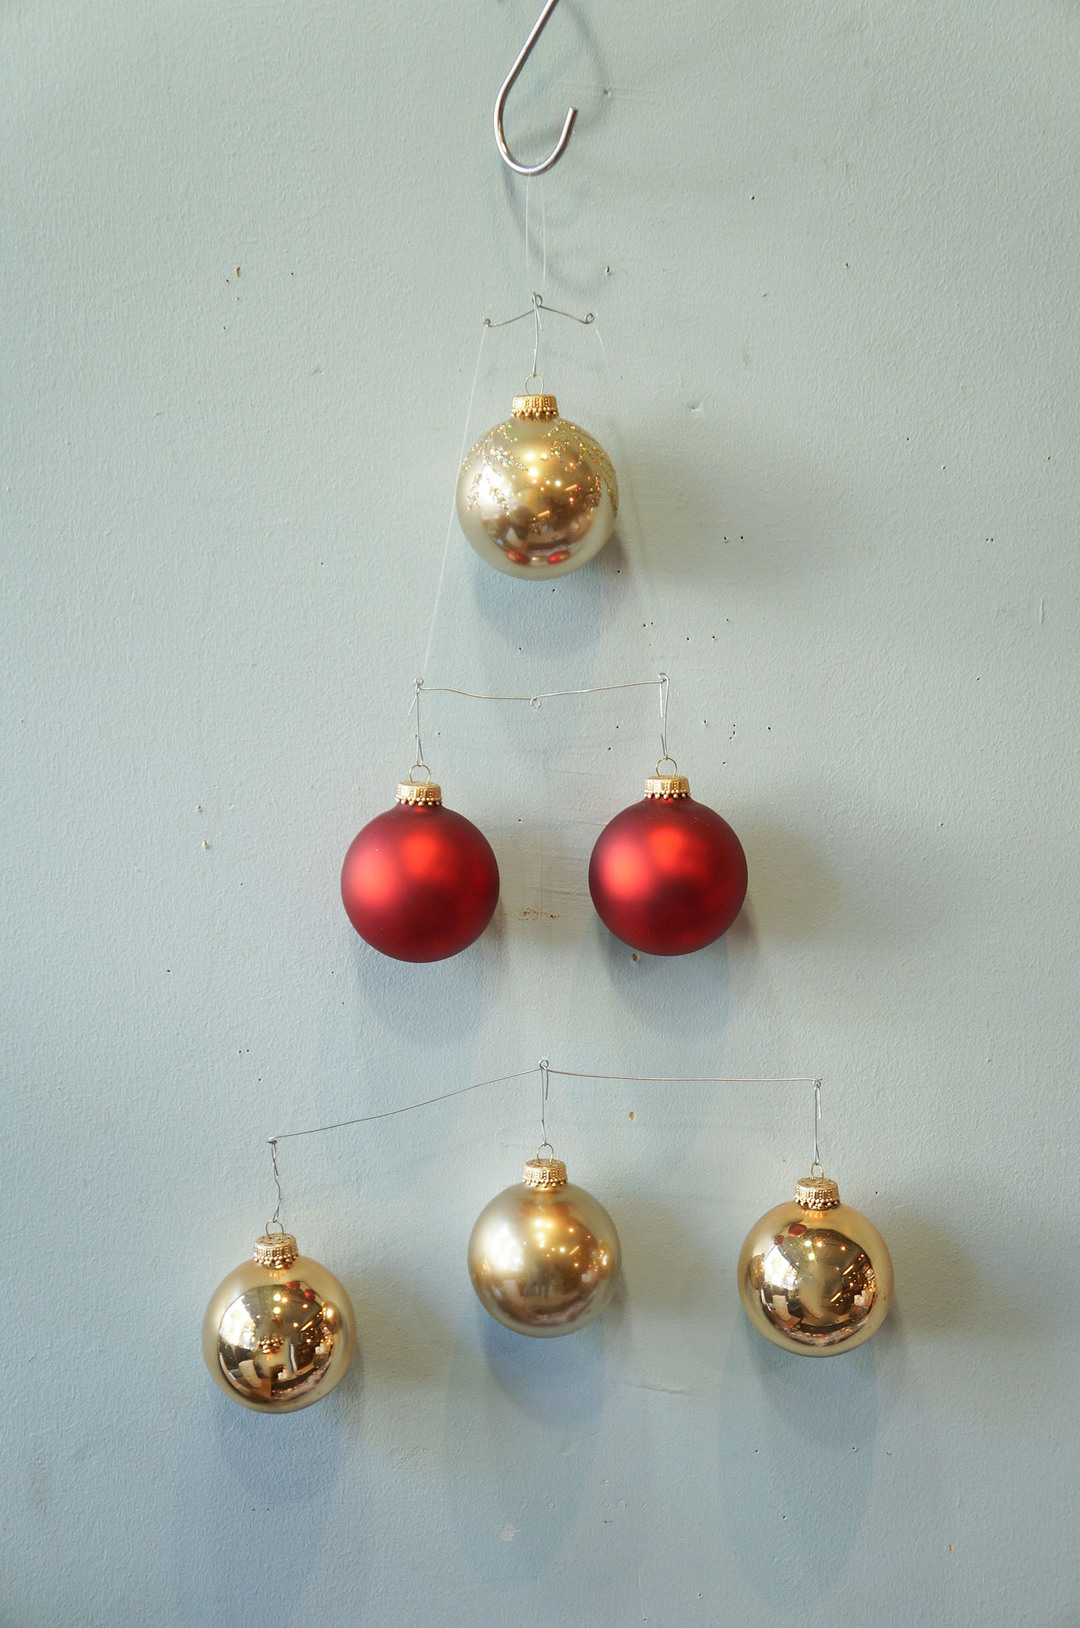 Vintage Blown Glass Christmas Ball Ornament/ヴィンテージ クリスマス オーナメント 吹きガラス ボール レトロ 6個セット 9